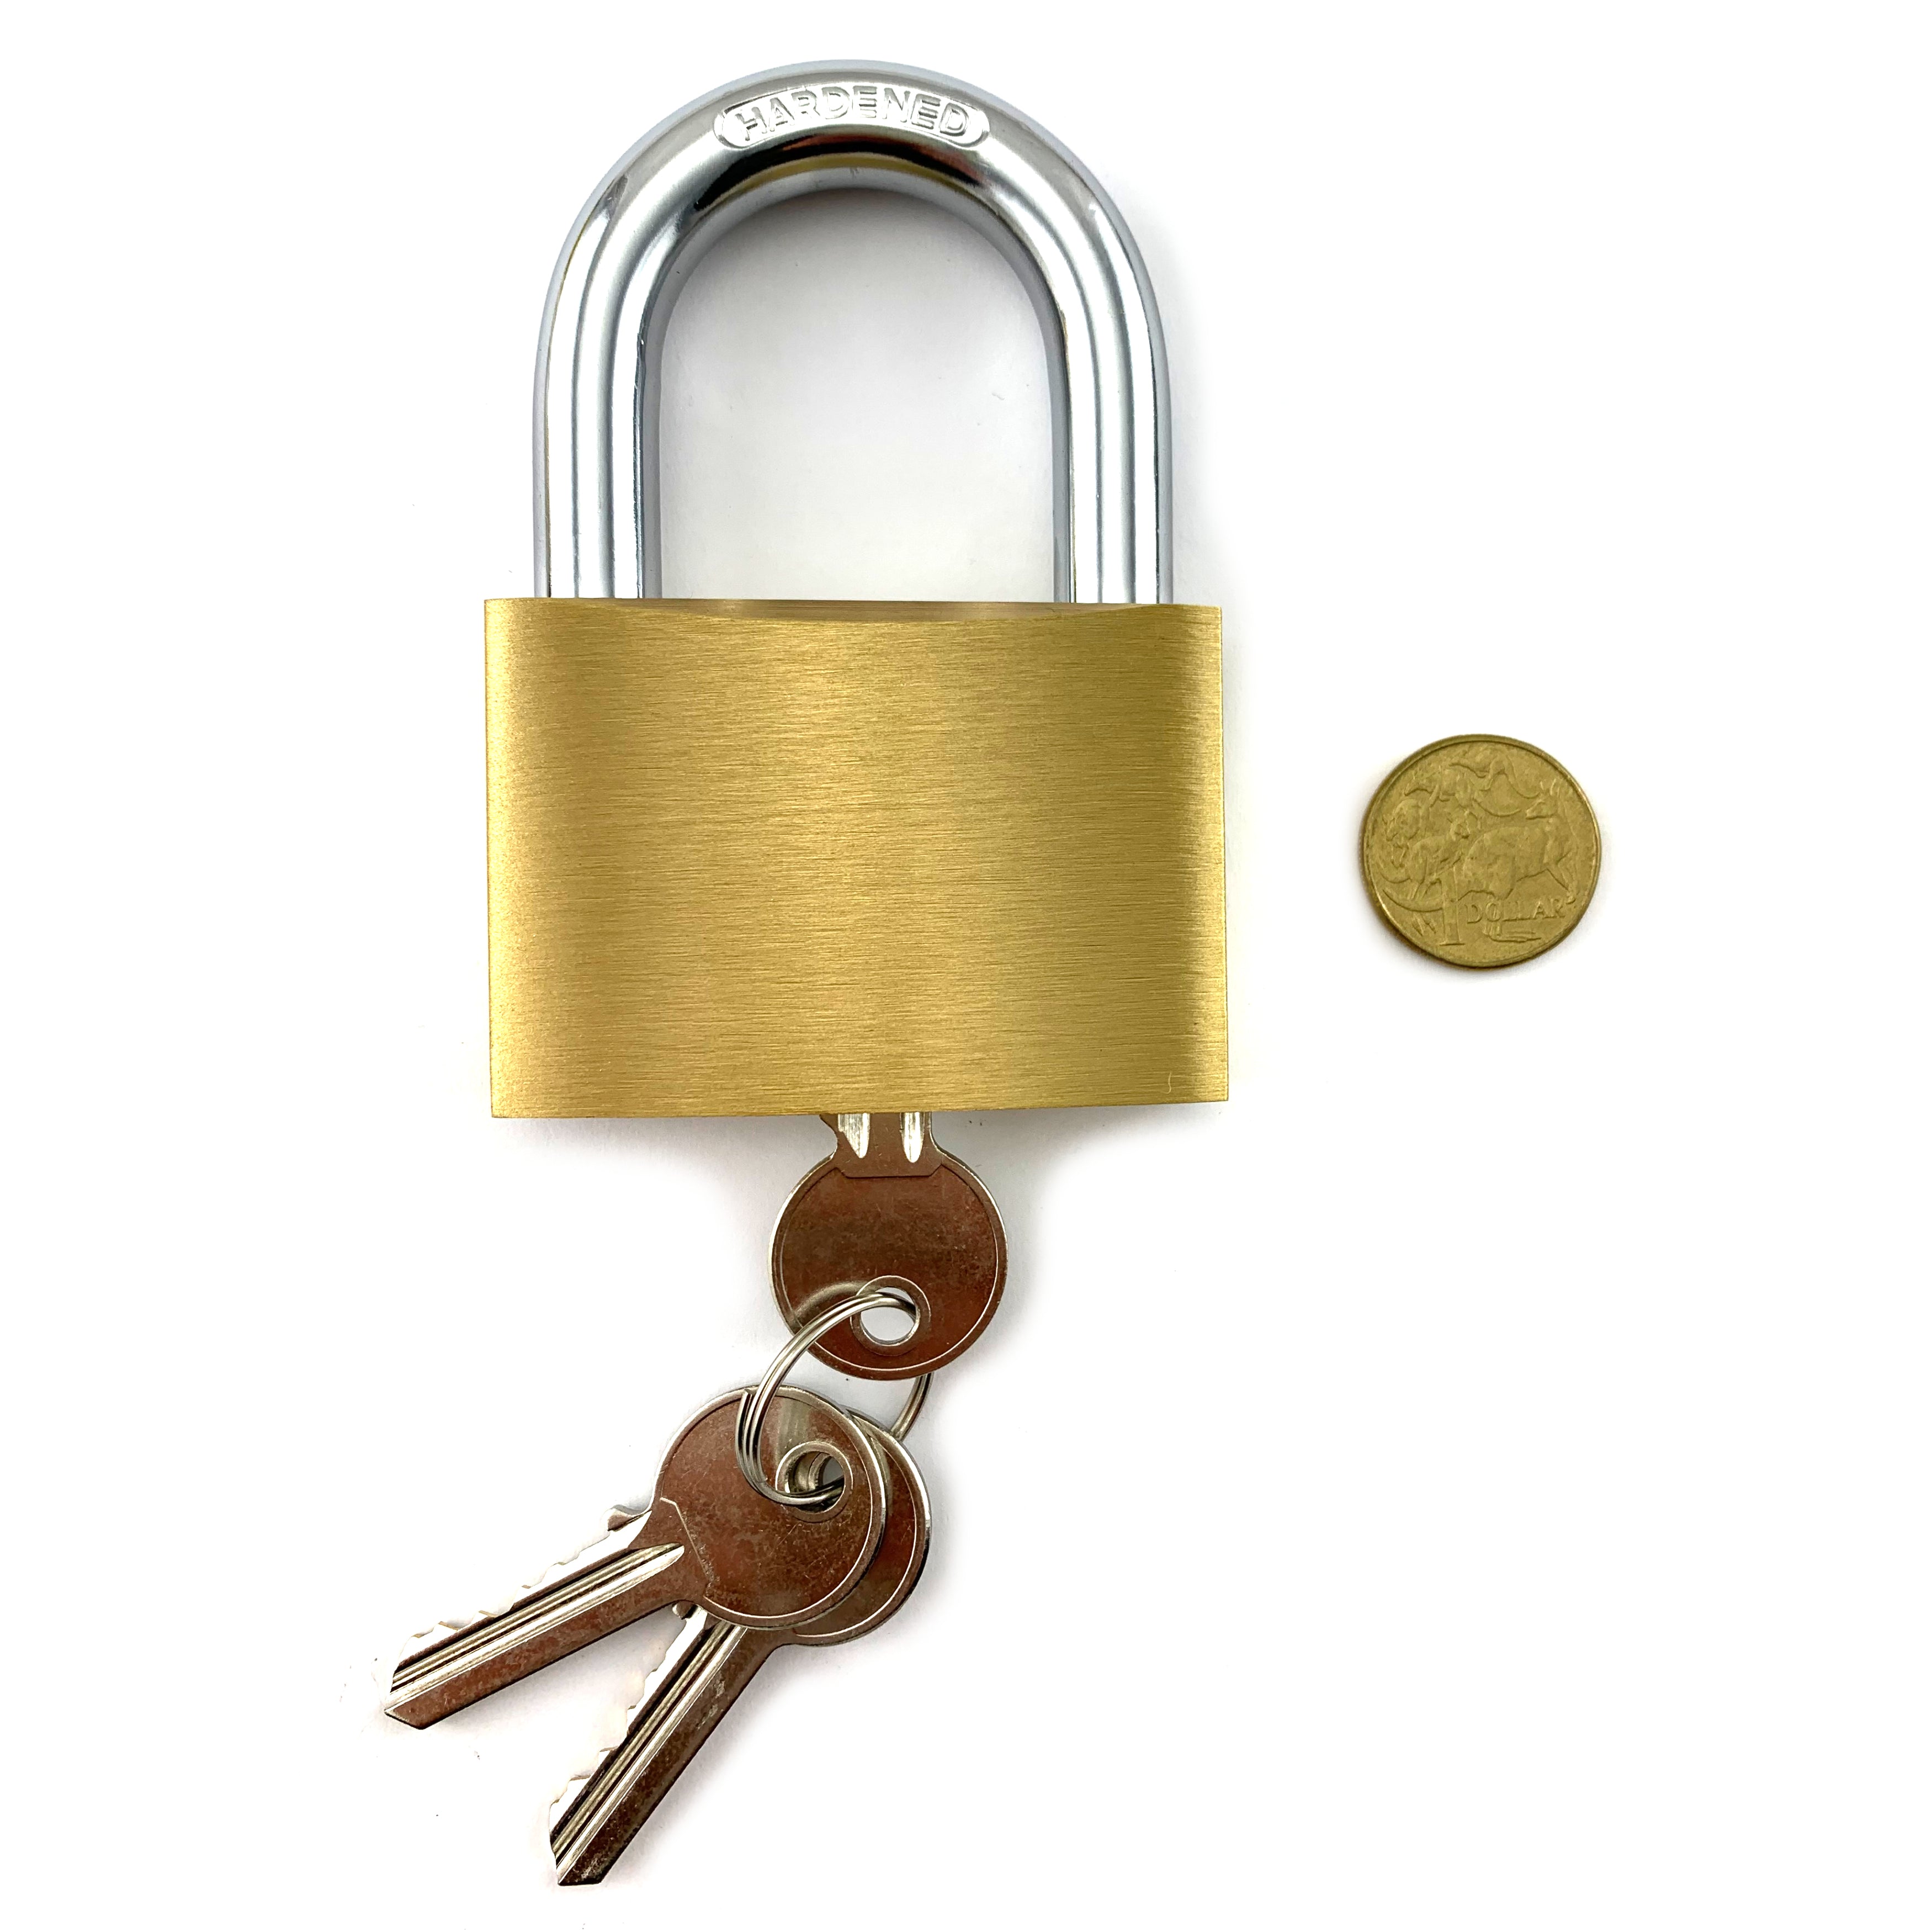 Extra-large hardened steel and brass padlock. Shackle size: 12mm. Australia wide delivery.